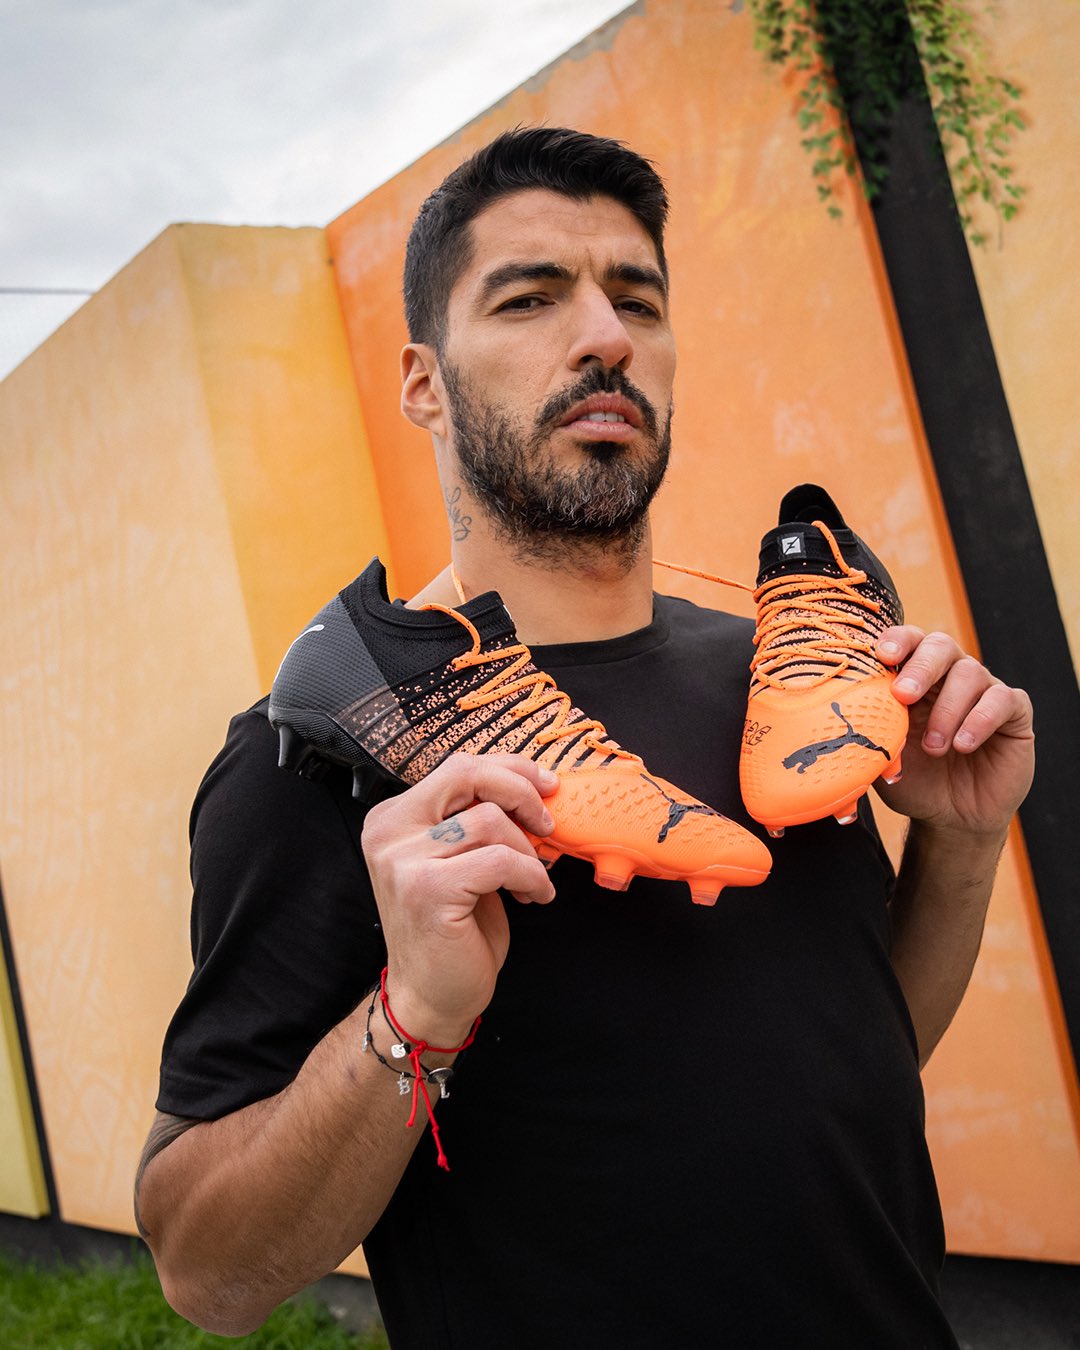 tumor Calificación Contribución Luis Suárez on Twitter: "Guided by Instinct, led by FUTURE Z 🚧  @pumafootball https://t.co/wJNpW6c8we" / Twitter